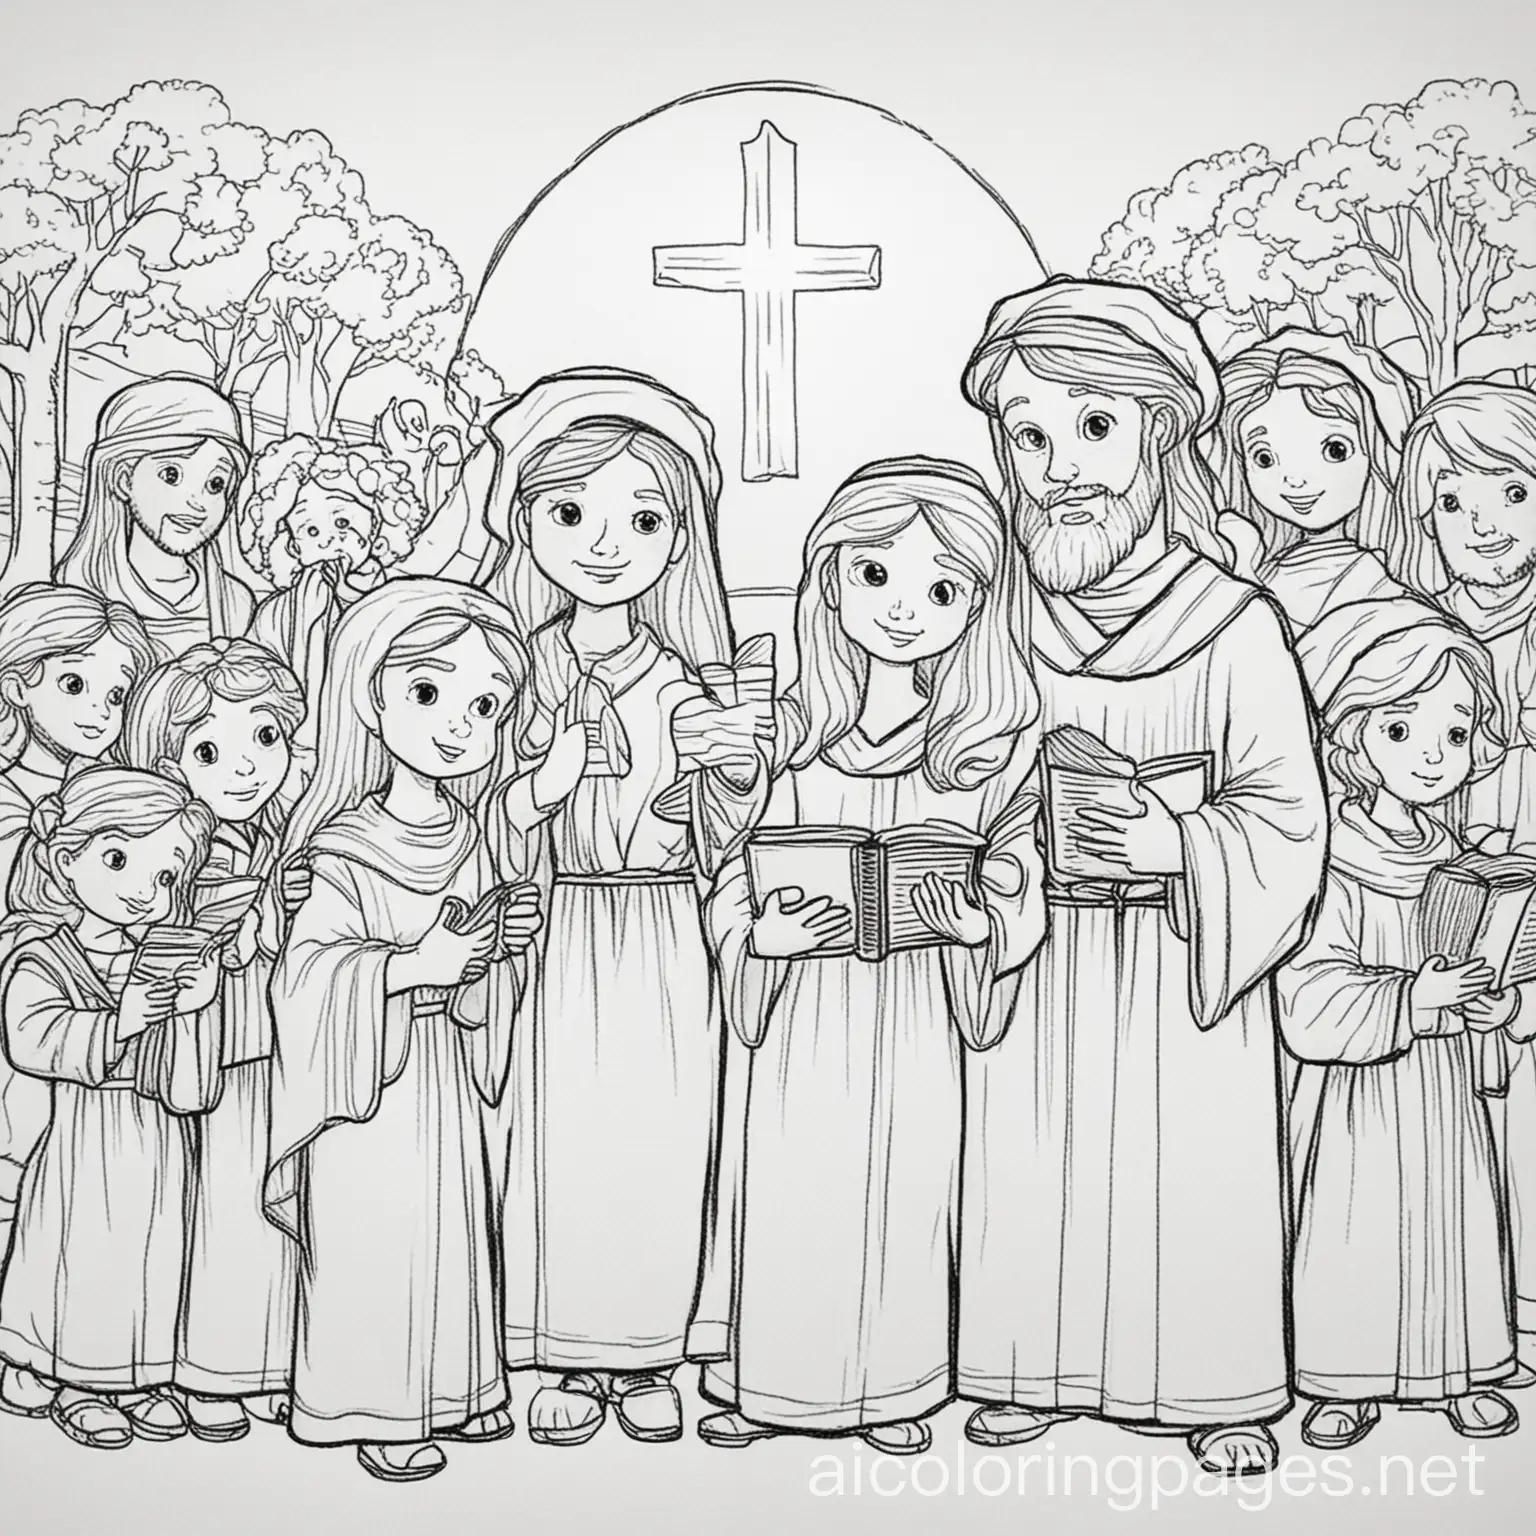 Bible stories, Coloring Page, black and white, line art, white background, Simplicity, Ample White Space. The background of the coloring page is plain white to make it easy for young children to color within the lines. The outlines of all the subjects are easy to distinguish, making it simple for kids to color without too much difficulty